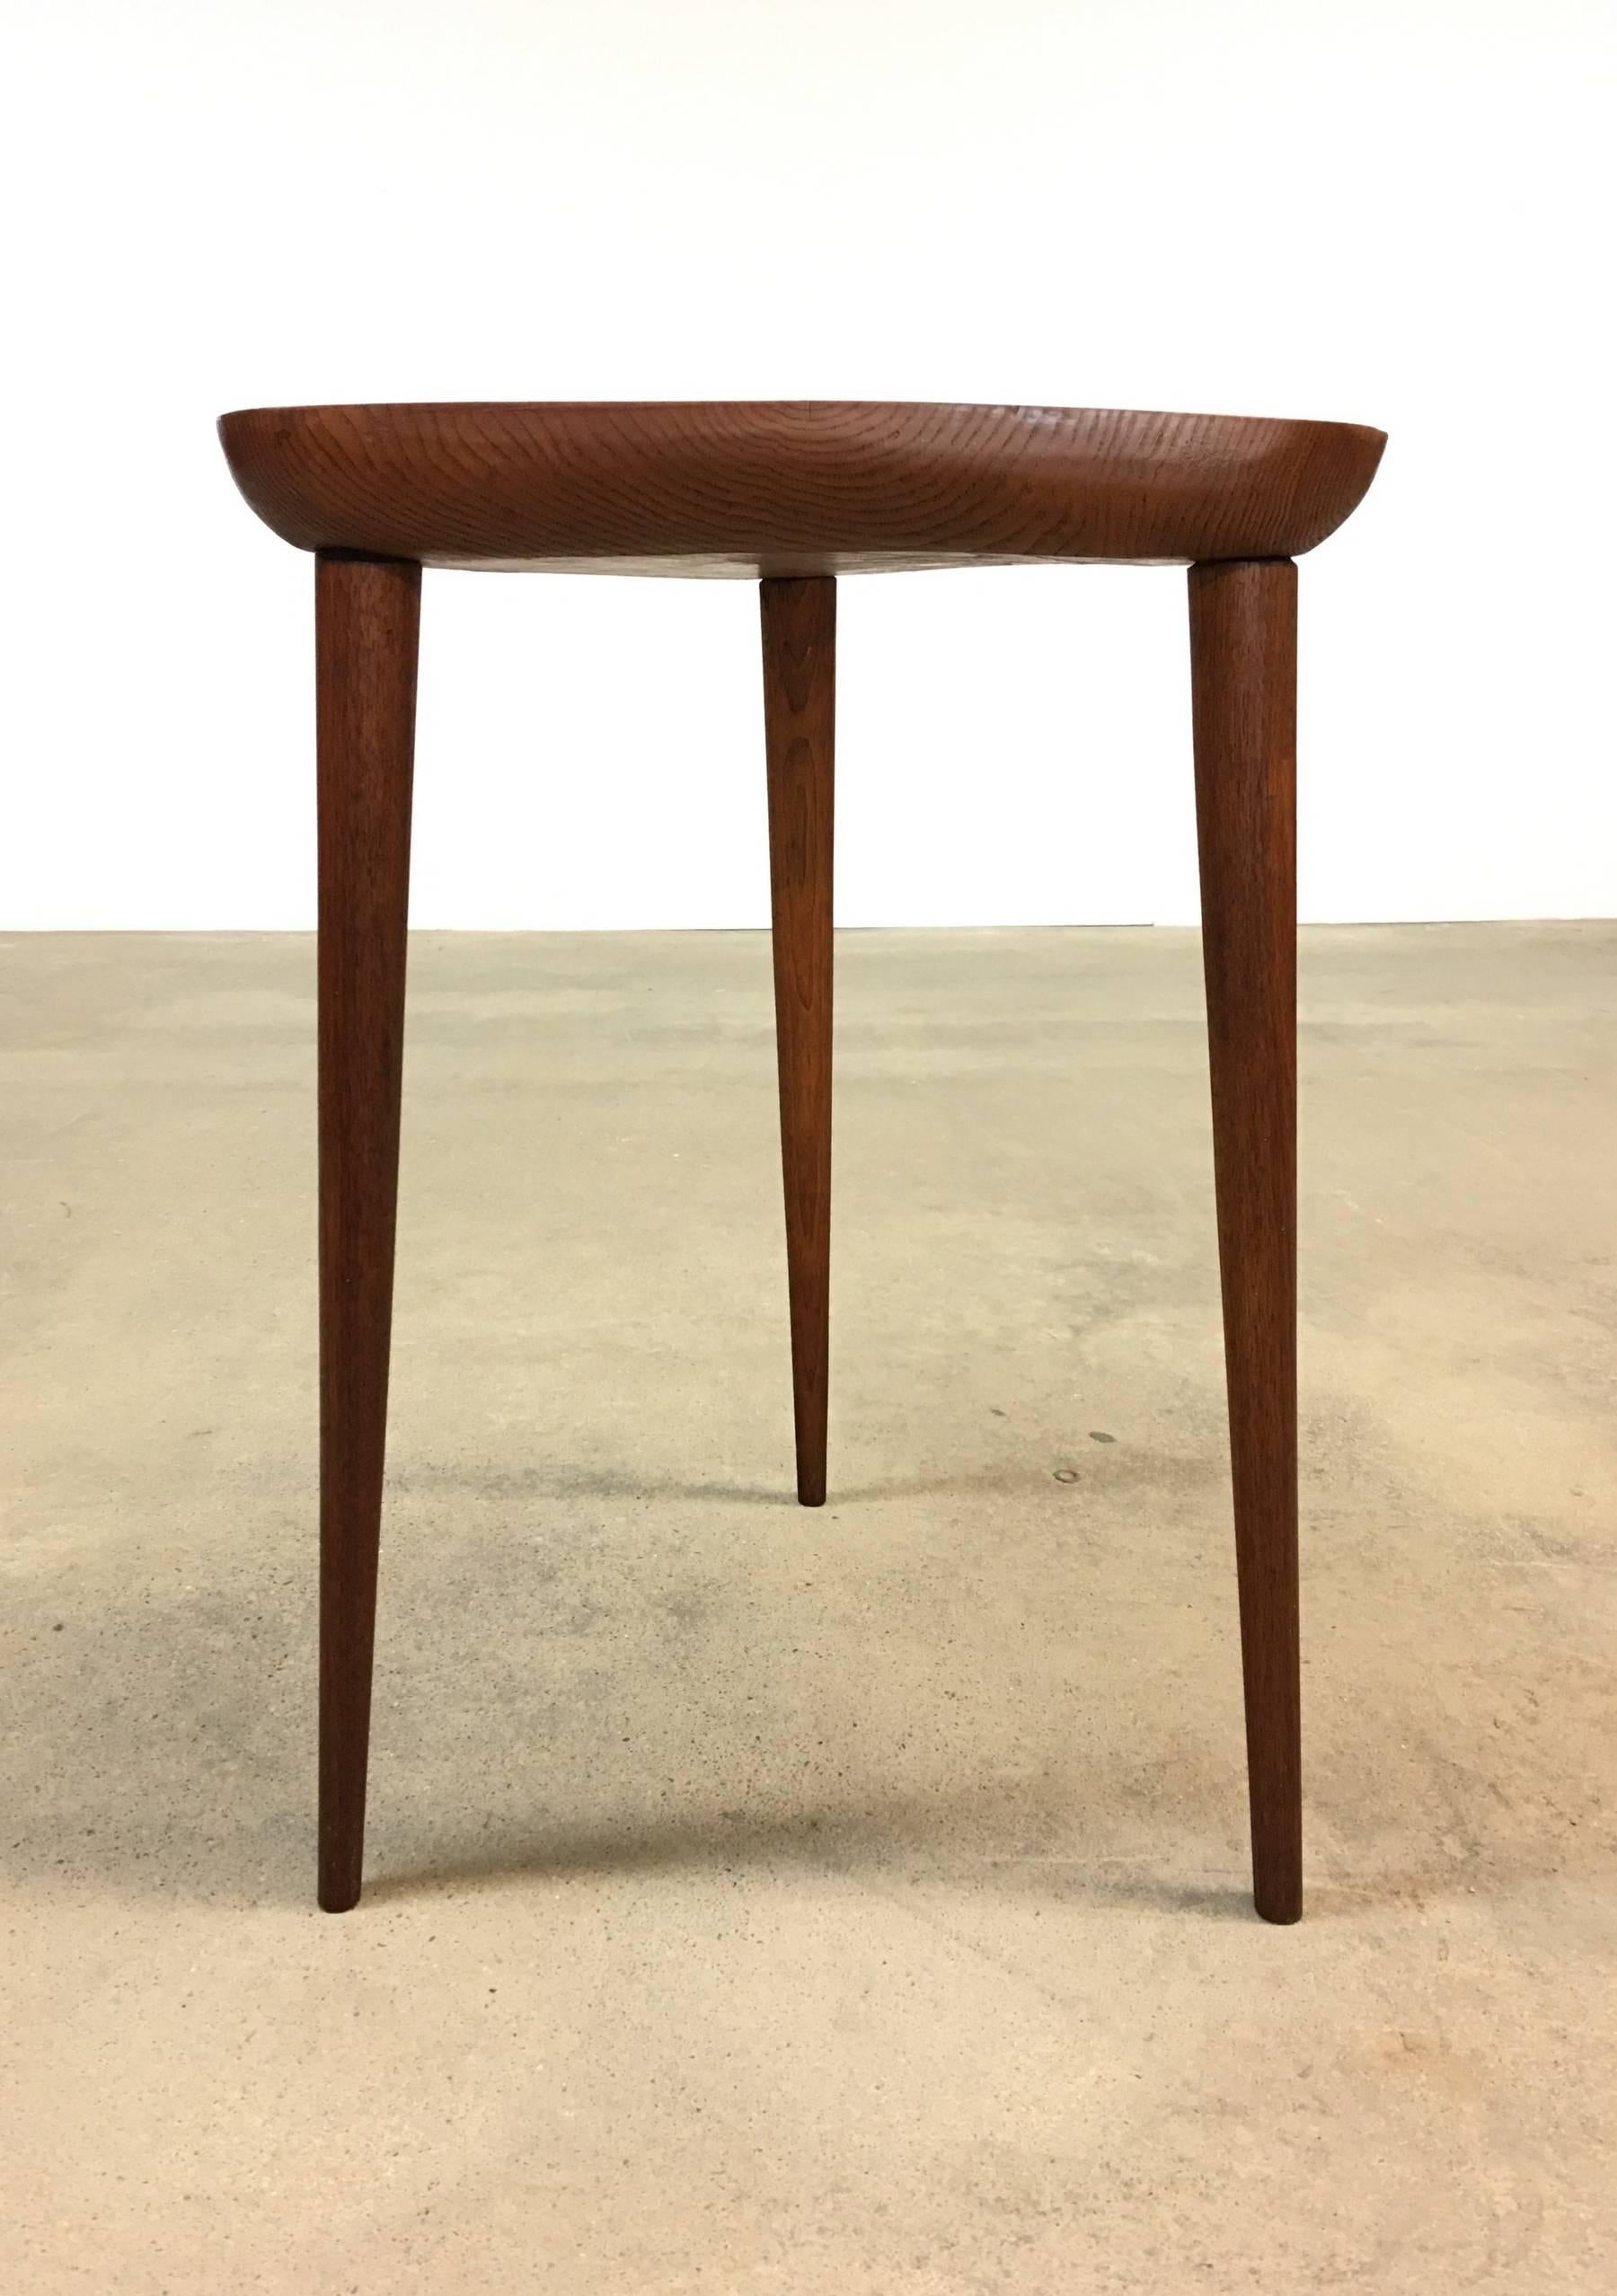 Tripod table in oak, teak and ebony, by Phillip Lloyd Powell, circa 1974. Table consists of a triangular shaped top, with chipped carved edge, and chip carved / hand-shaped teak legs that join the top with through-tenon construction, and are held in